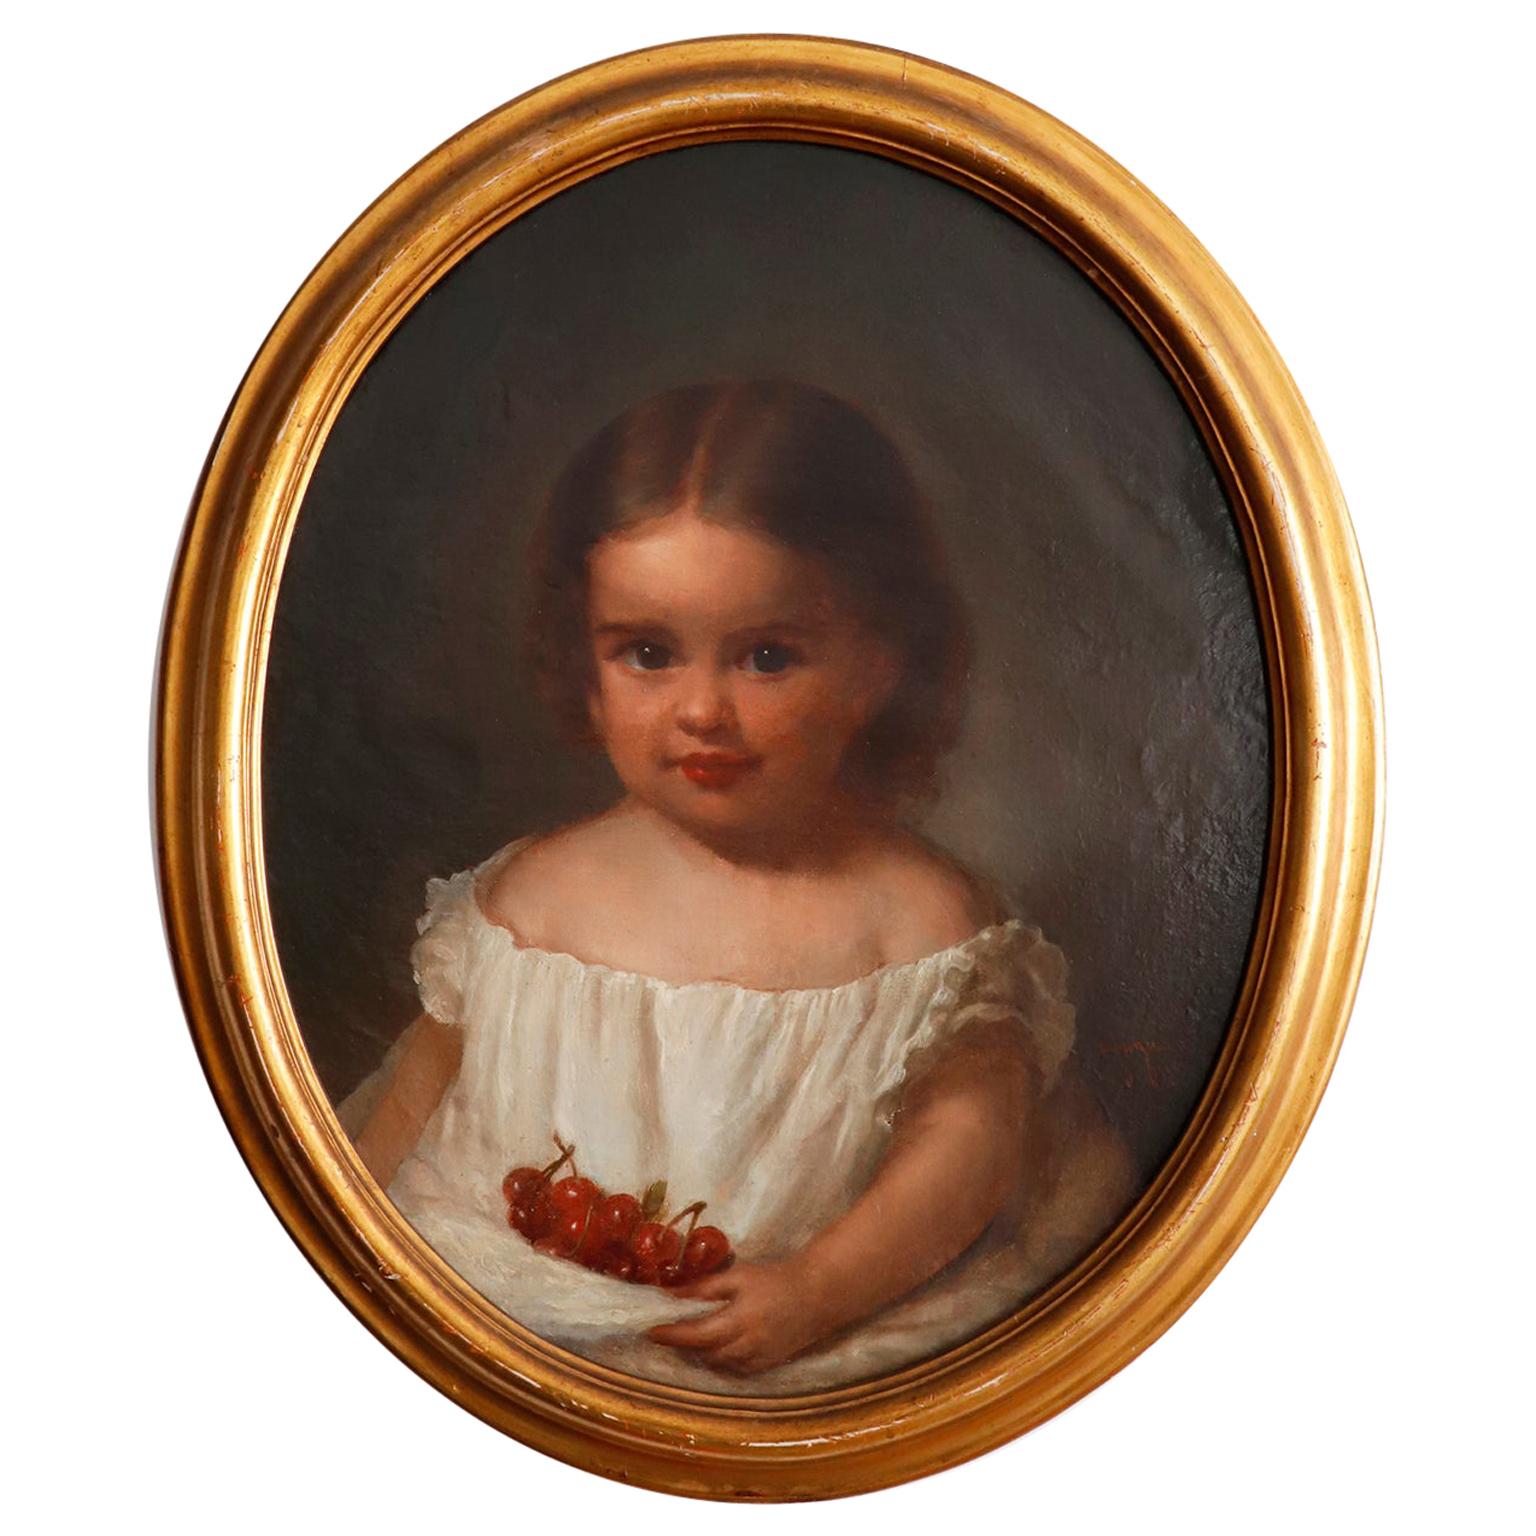 19th Century Oil on Canvas Portrait of Little Girl with Cherries